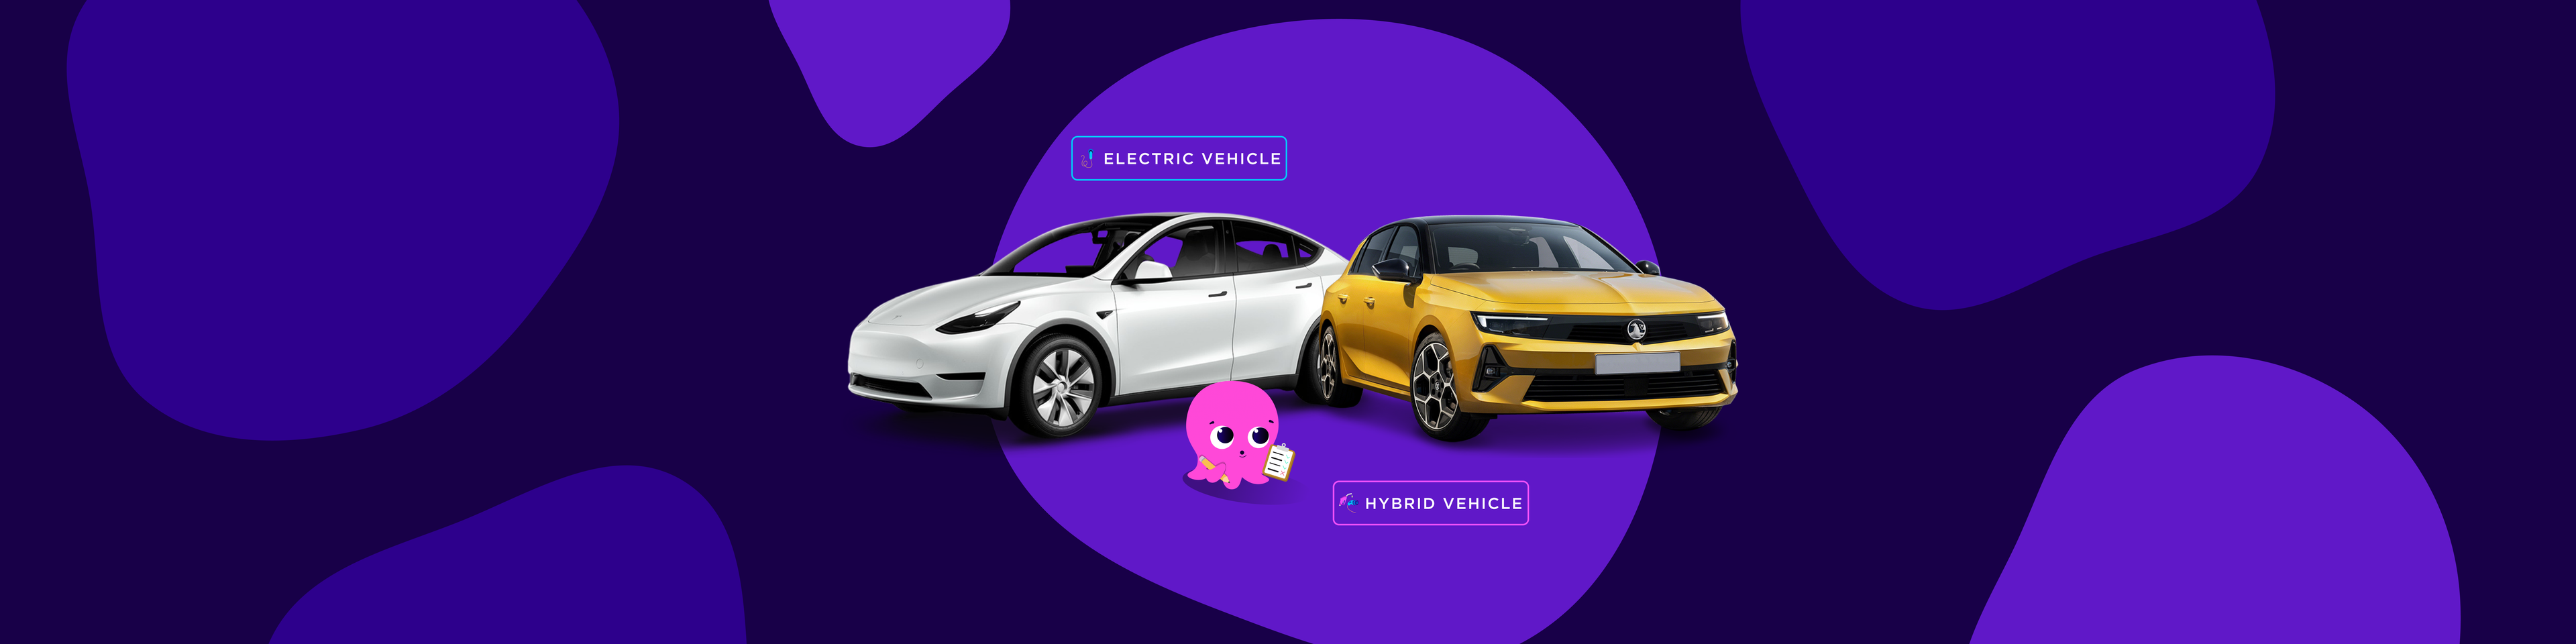 A hybrid and an EV being compared